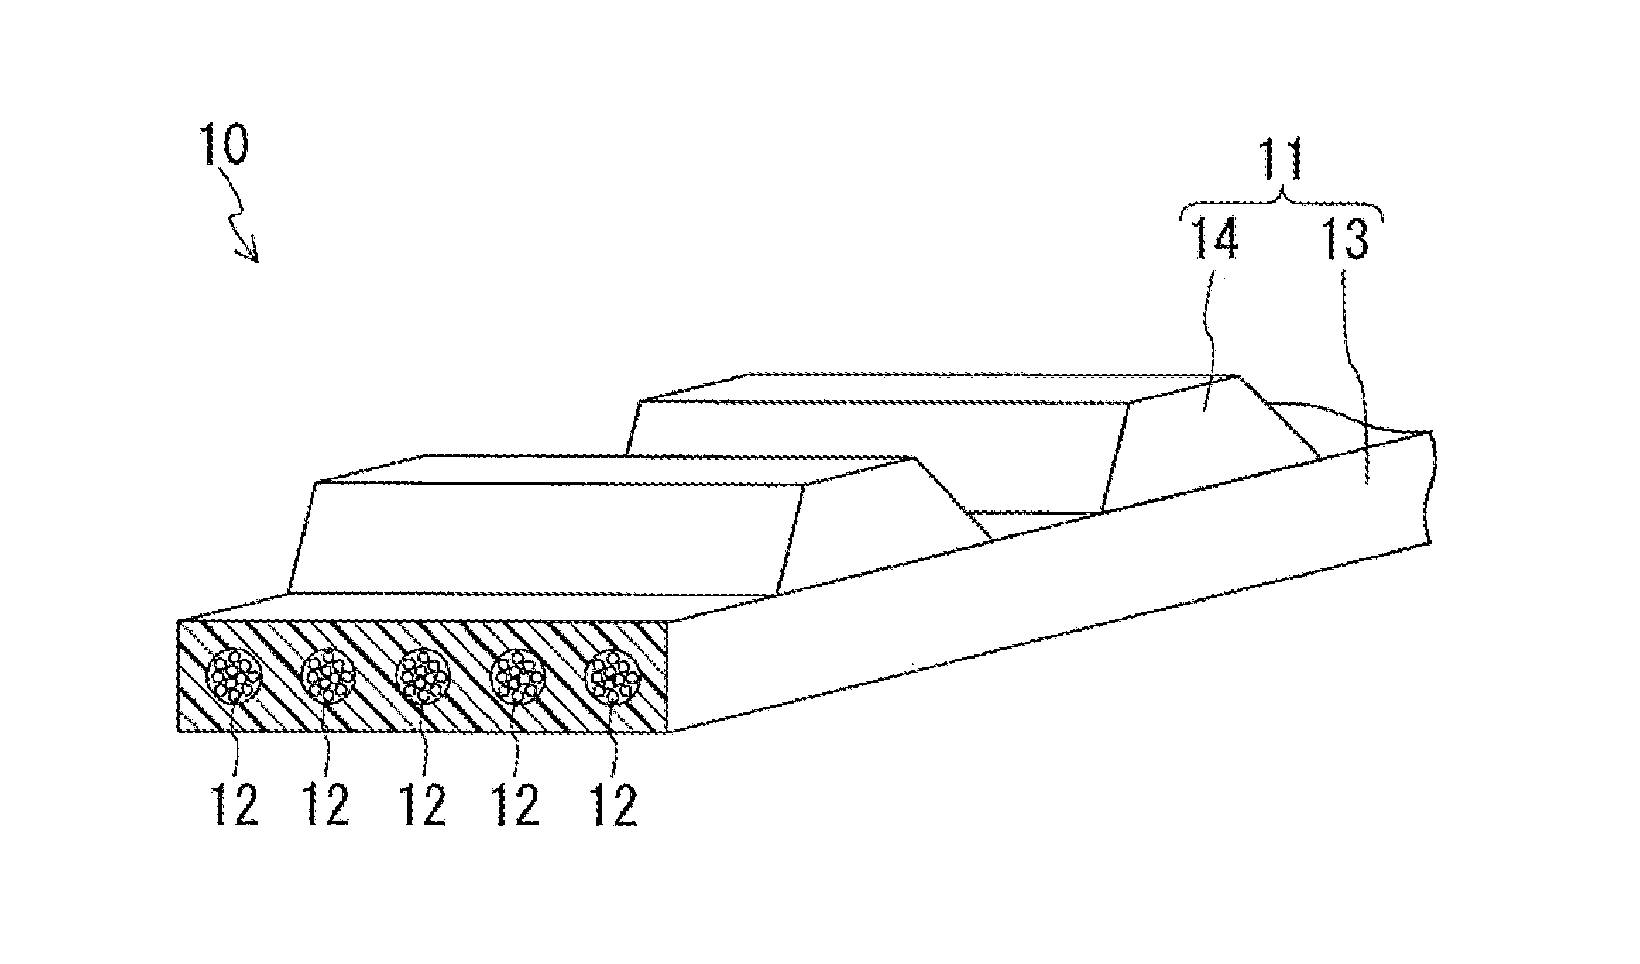 Reinforcement cord for reinforcing rubber product, and rubber product using same